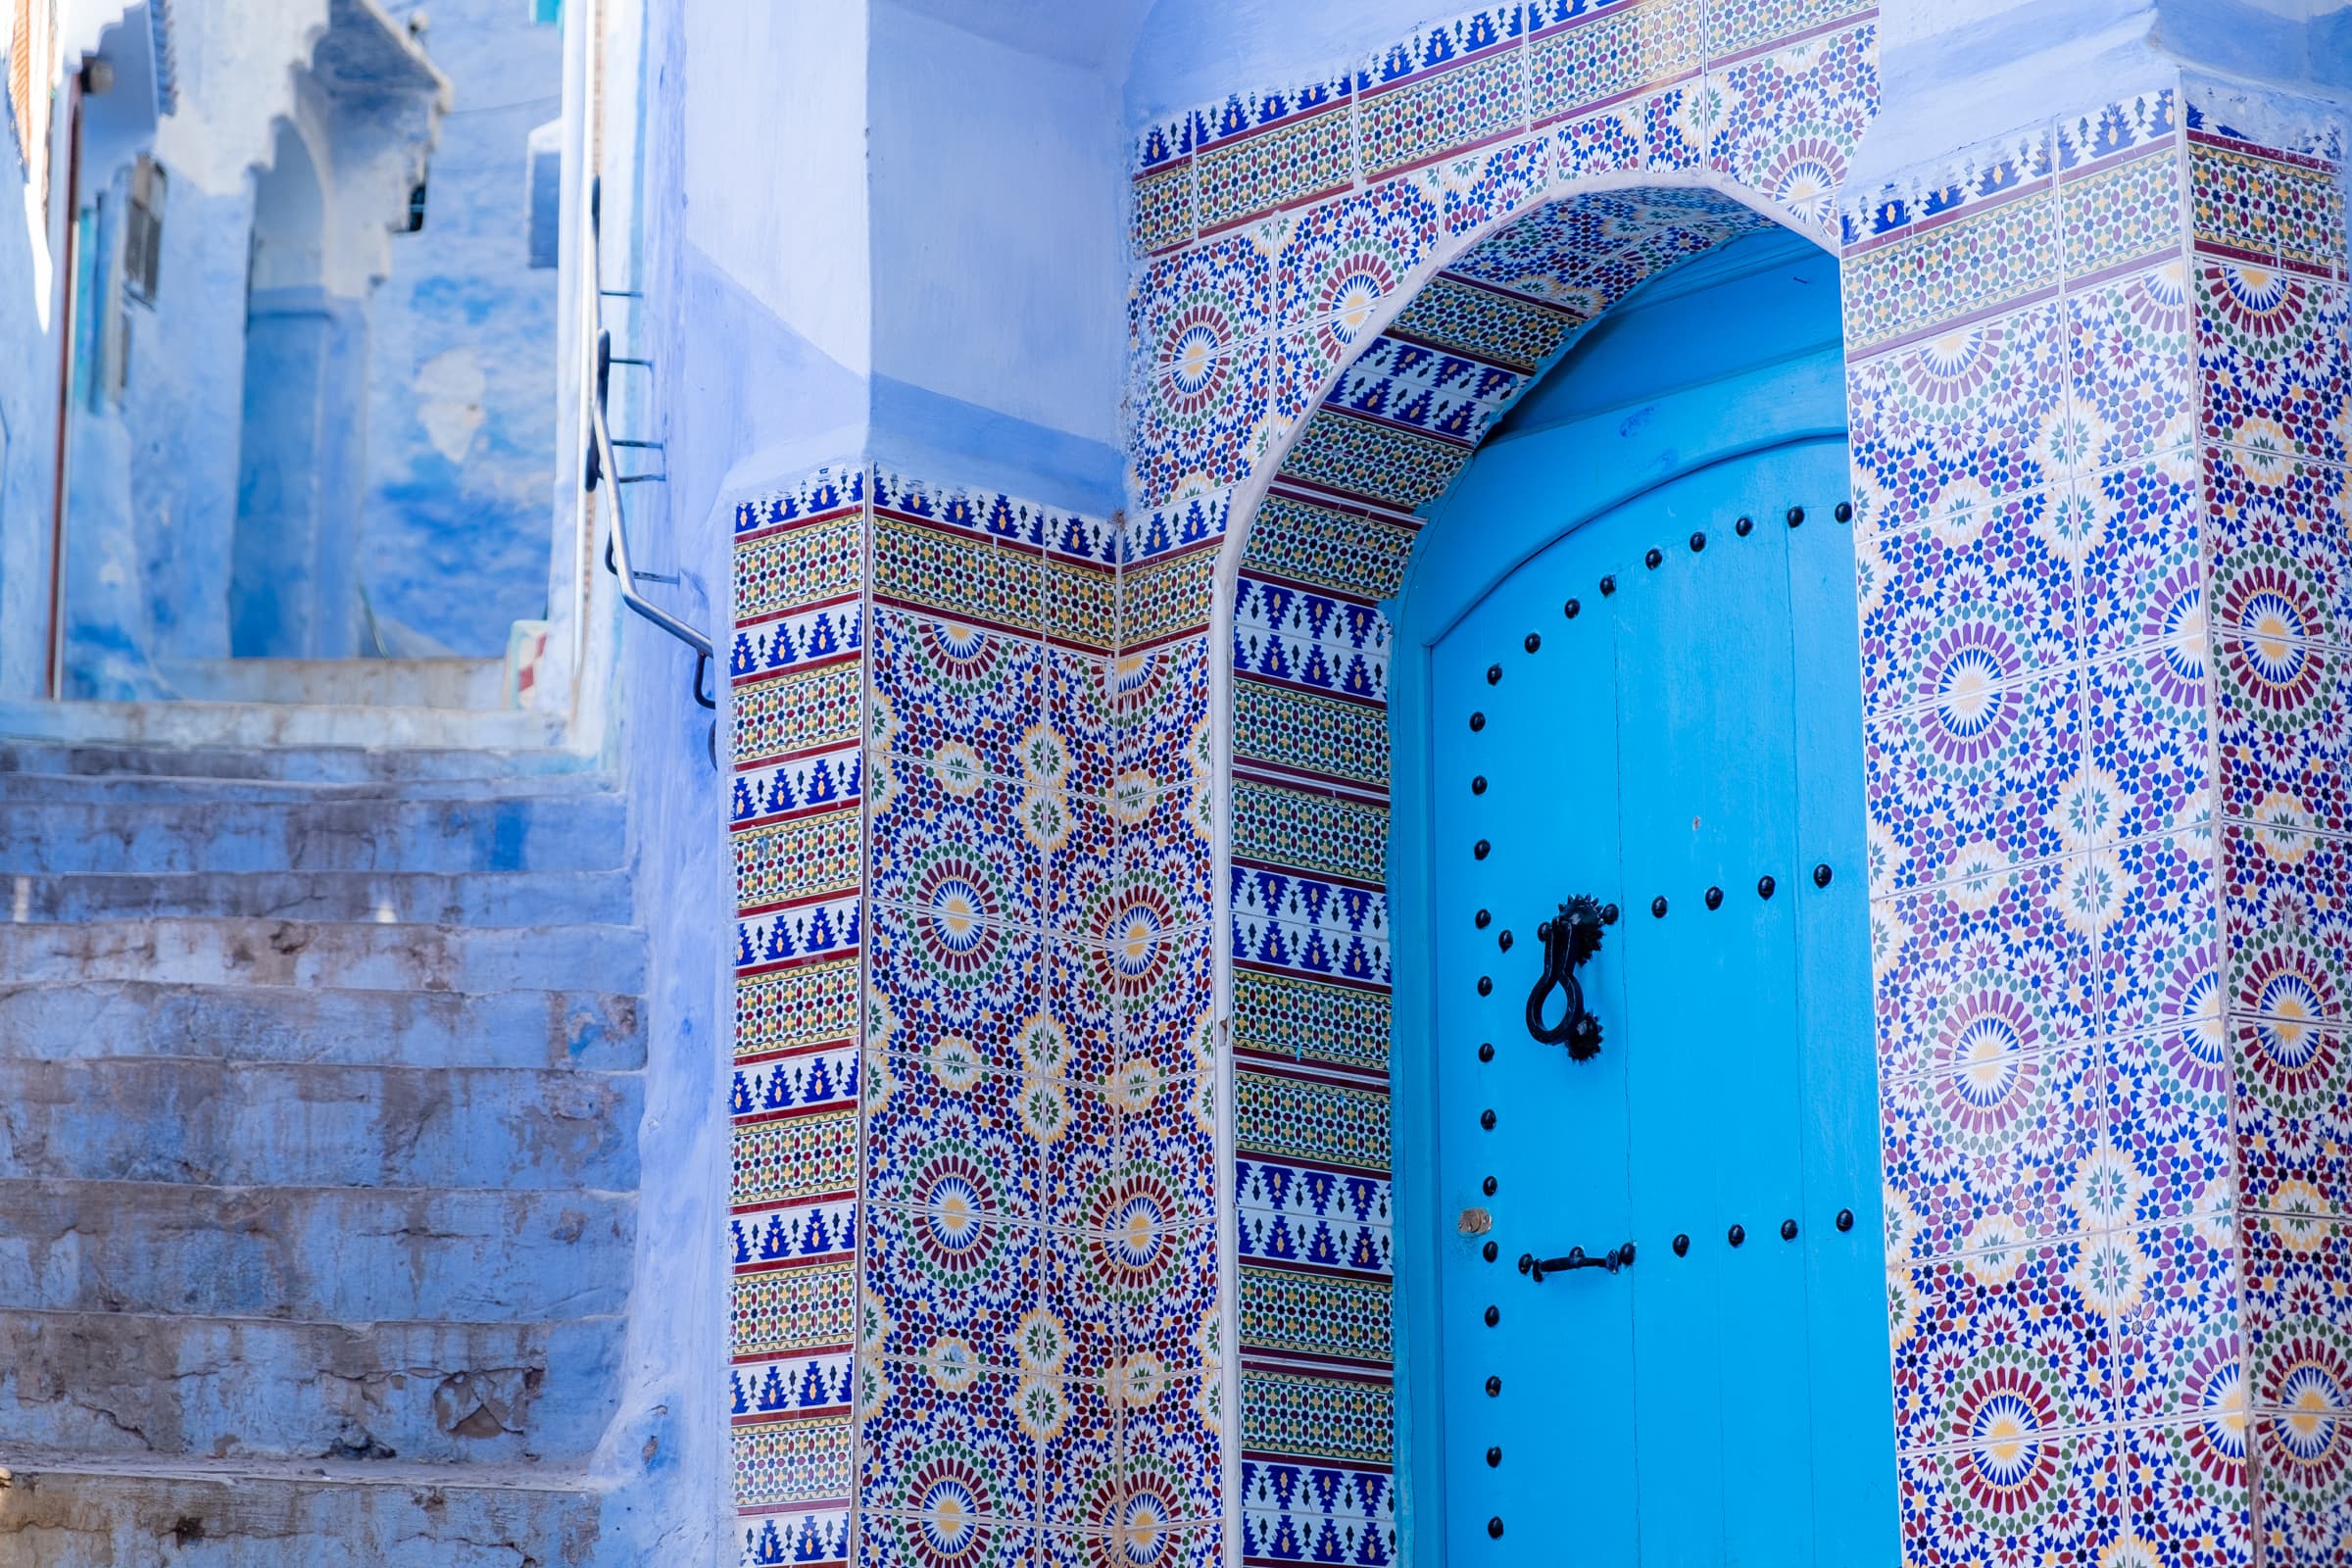 Intricately decorated tiled door and blue staircase, Chefchaouen, Morocco